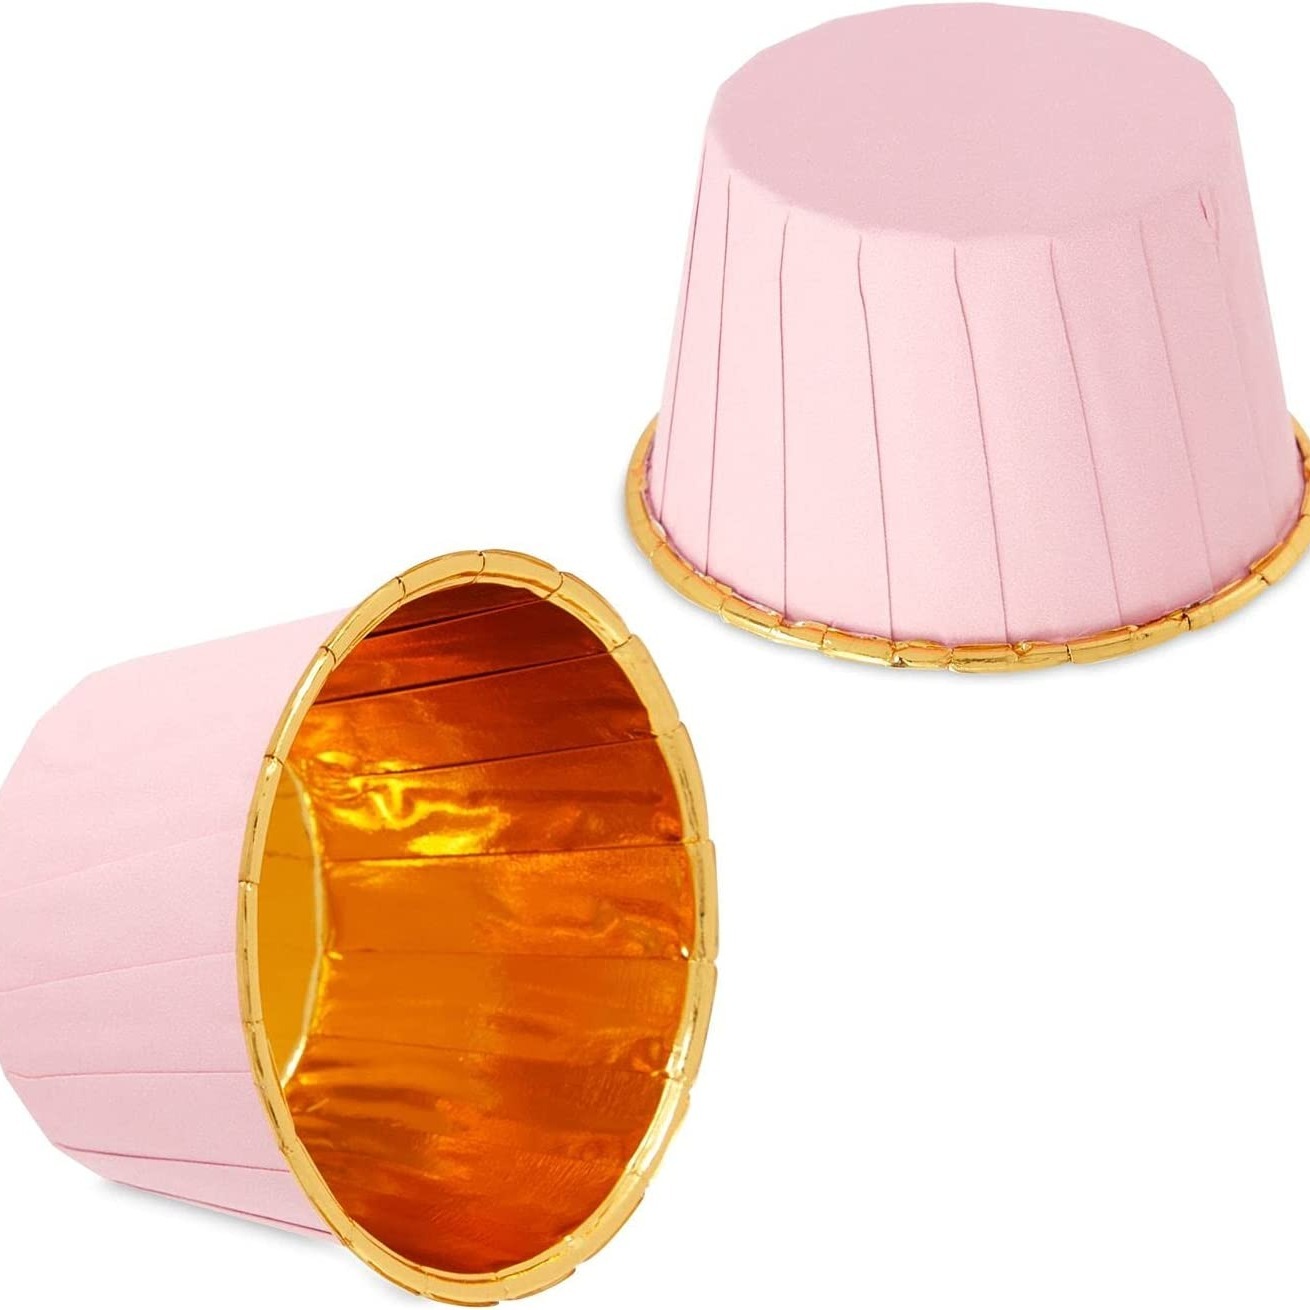 Pink and Gold Foil Cupcake Liners, Muffin Cups for Baking (2.75x1